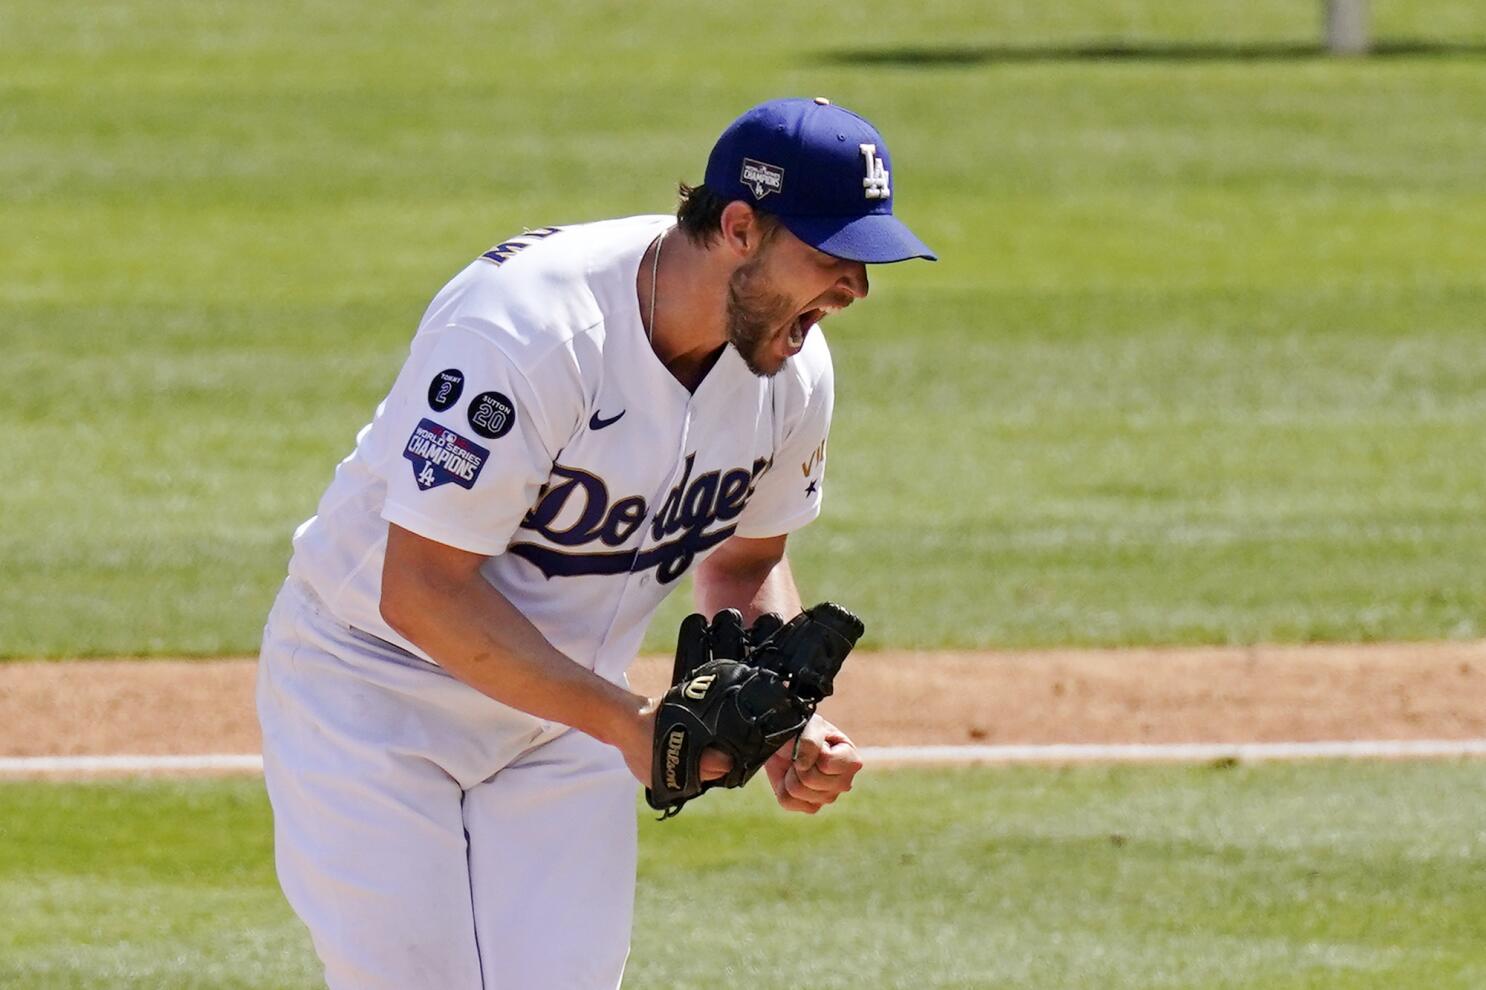 Clayton Kershaw gives up Dodgers' lead in Game 5 loss - The Washington Post